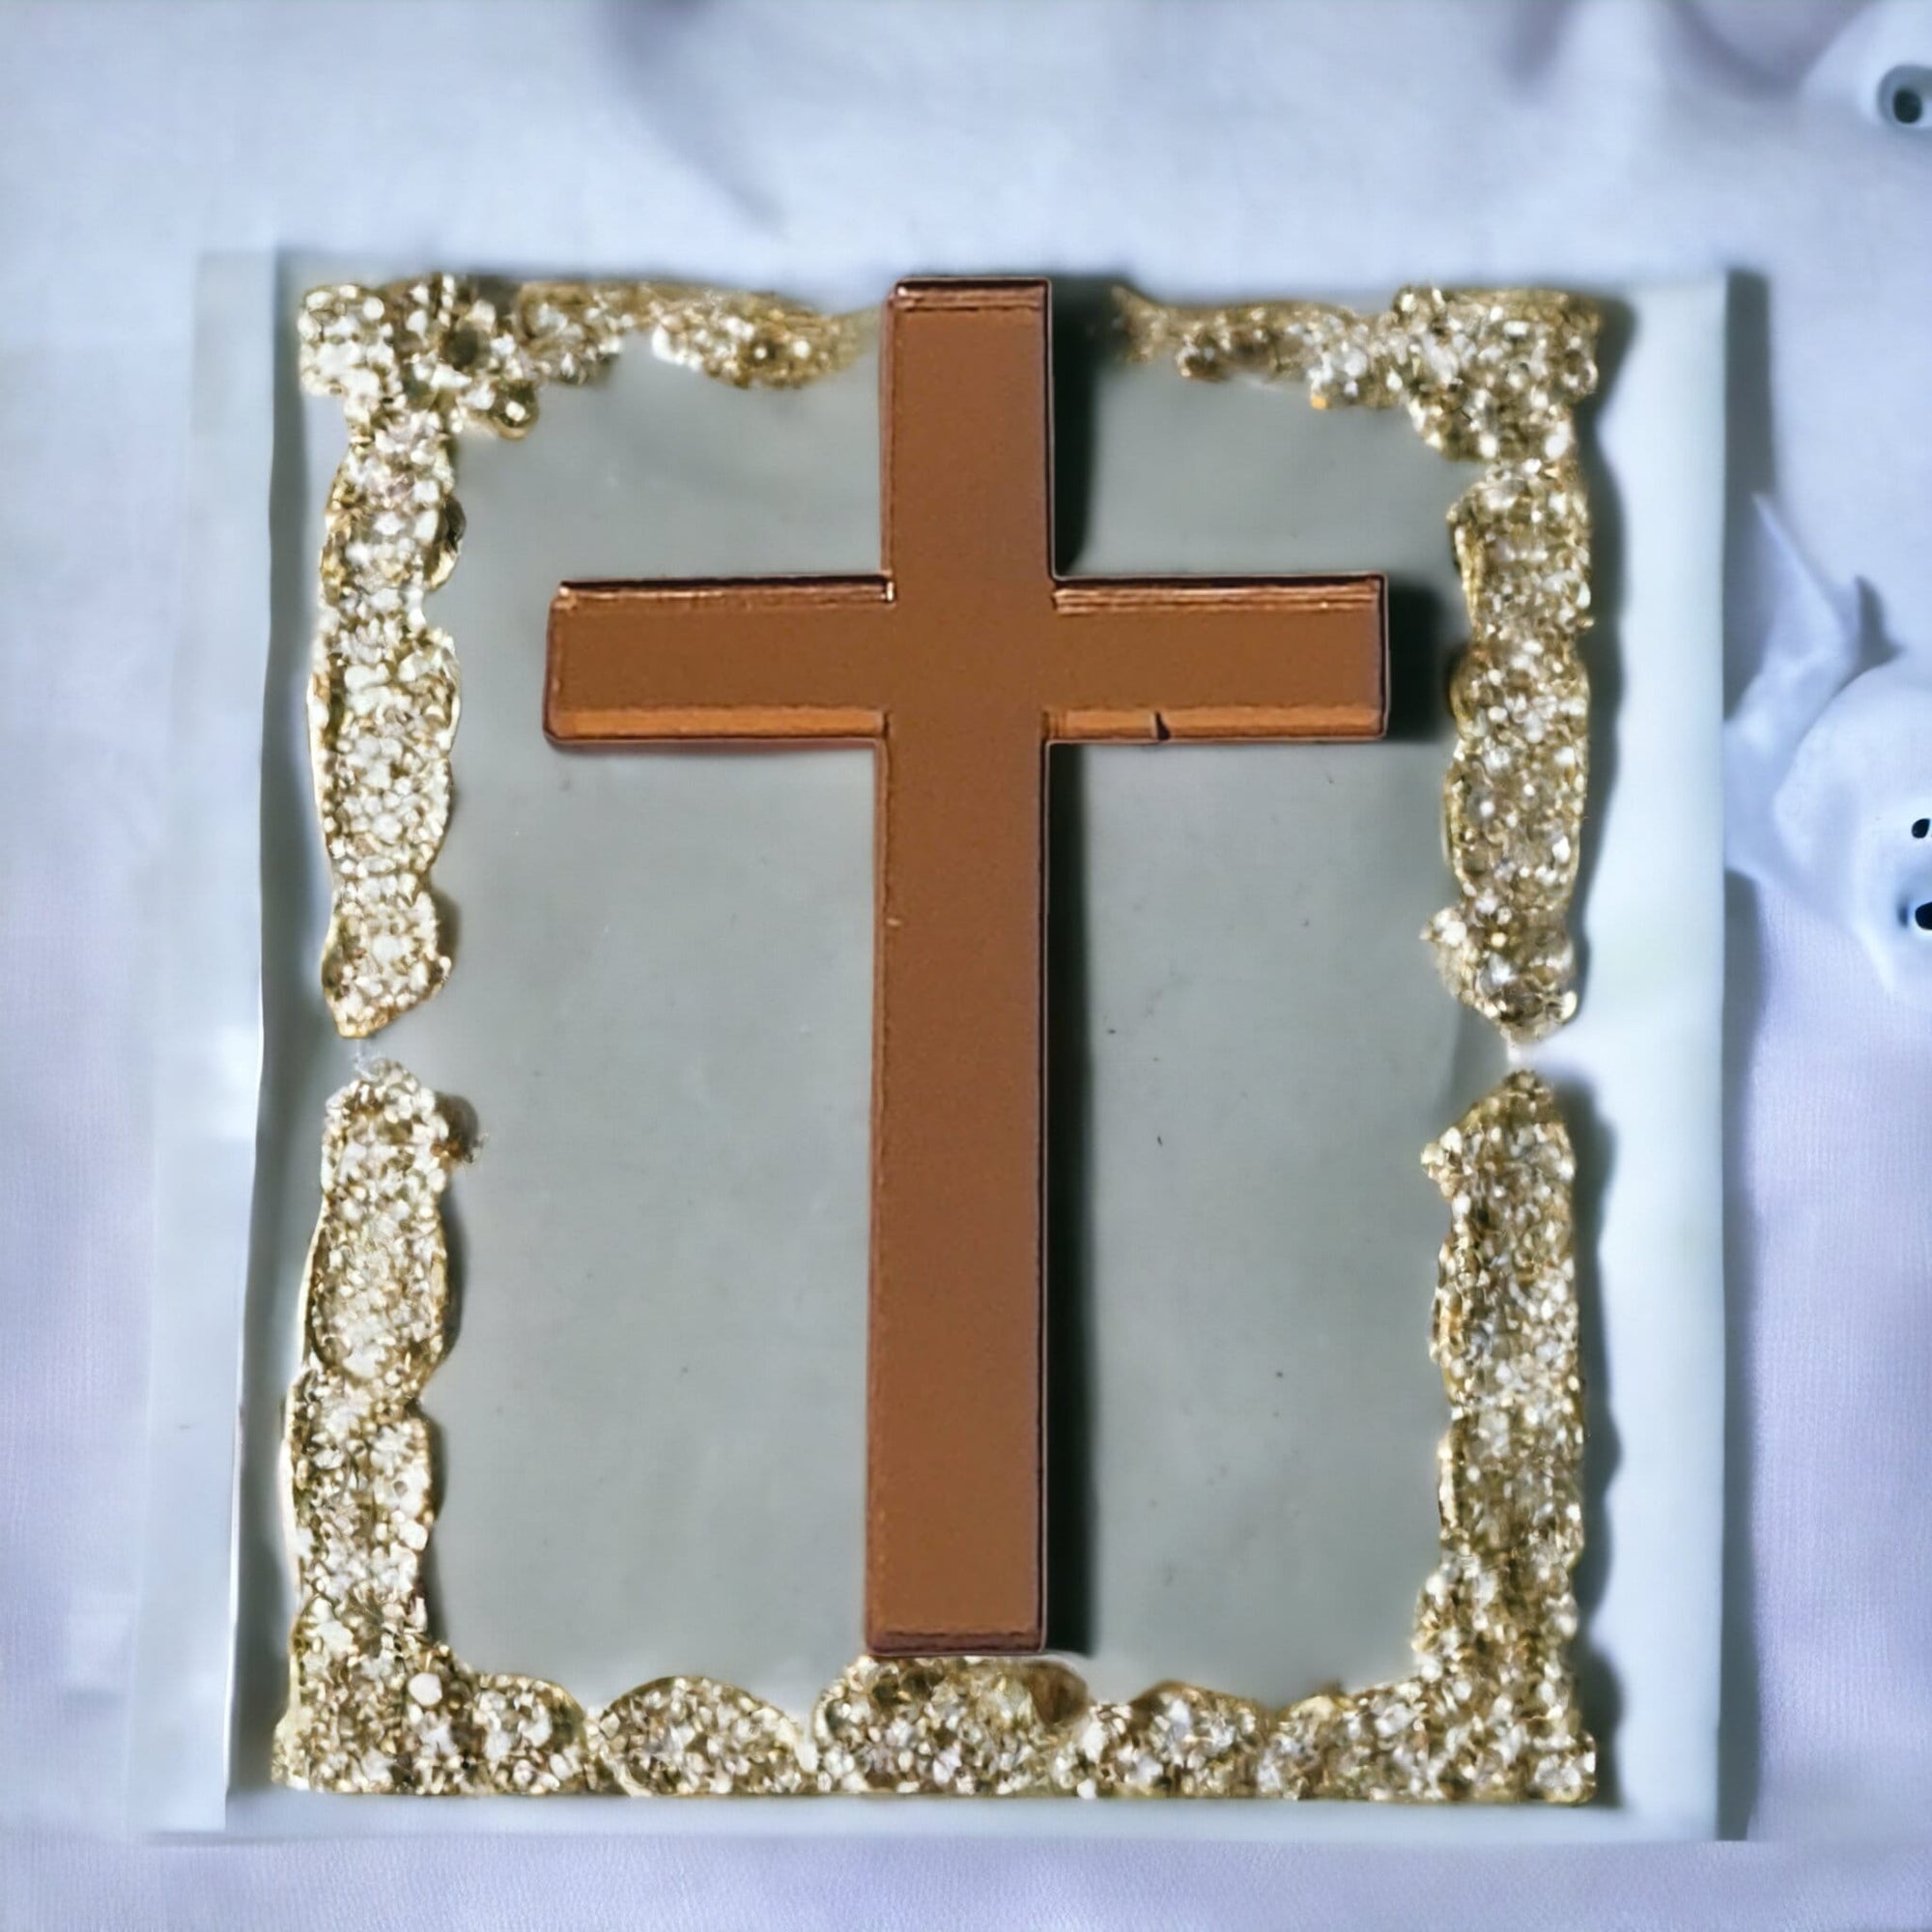 Cross Cake | Sprinkled with Love by Jaime